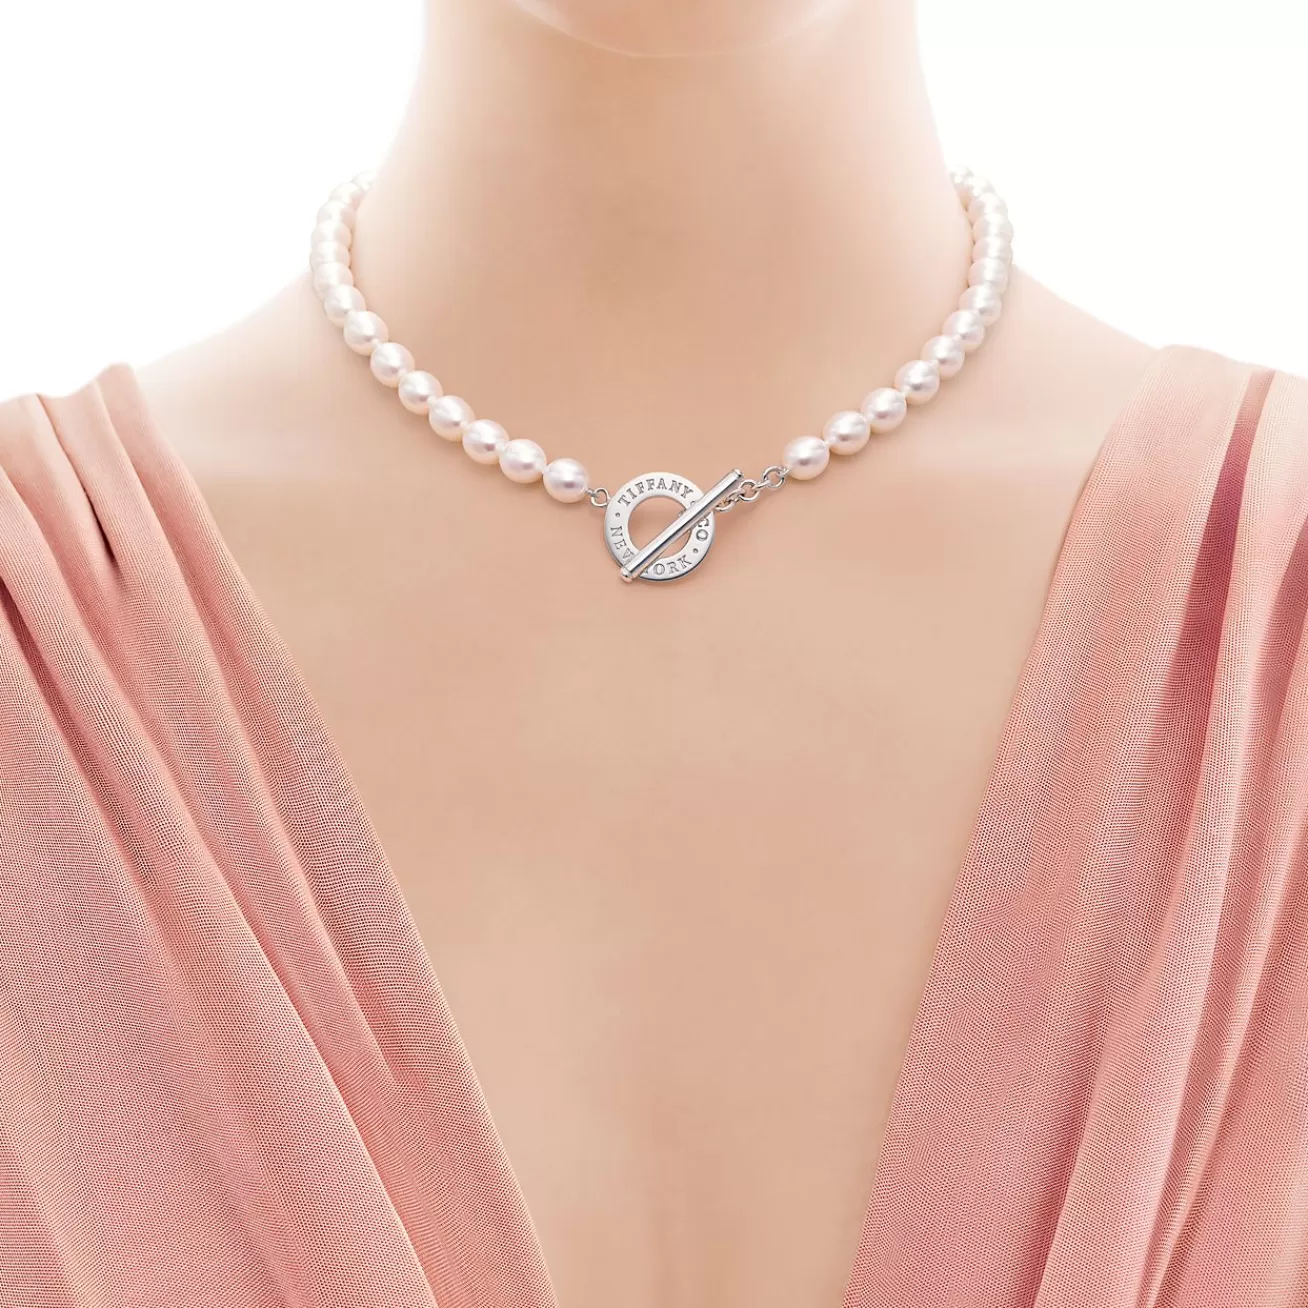 Tiffany & Co. Freshwater pearl toggle necklace in sterling silver. | ^ Necklaces & Pendants | Sterling Silver Jewelry